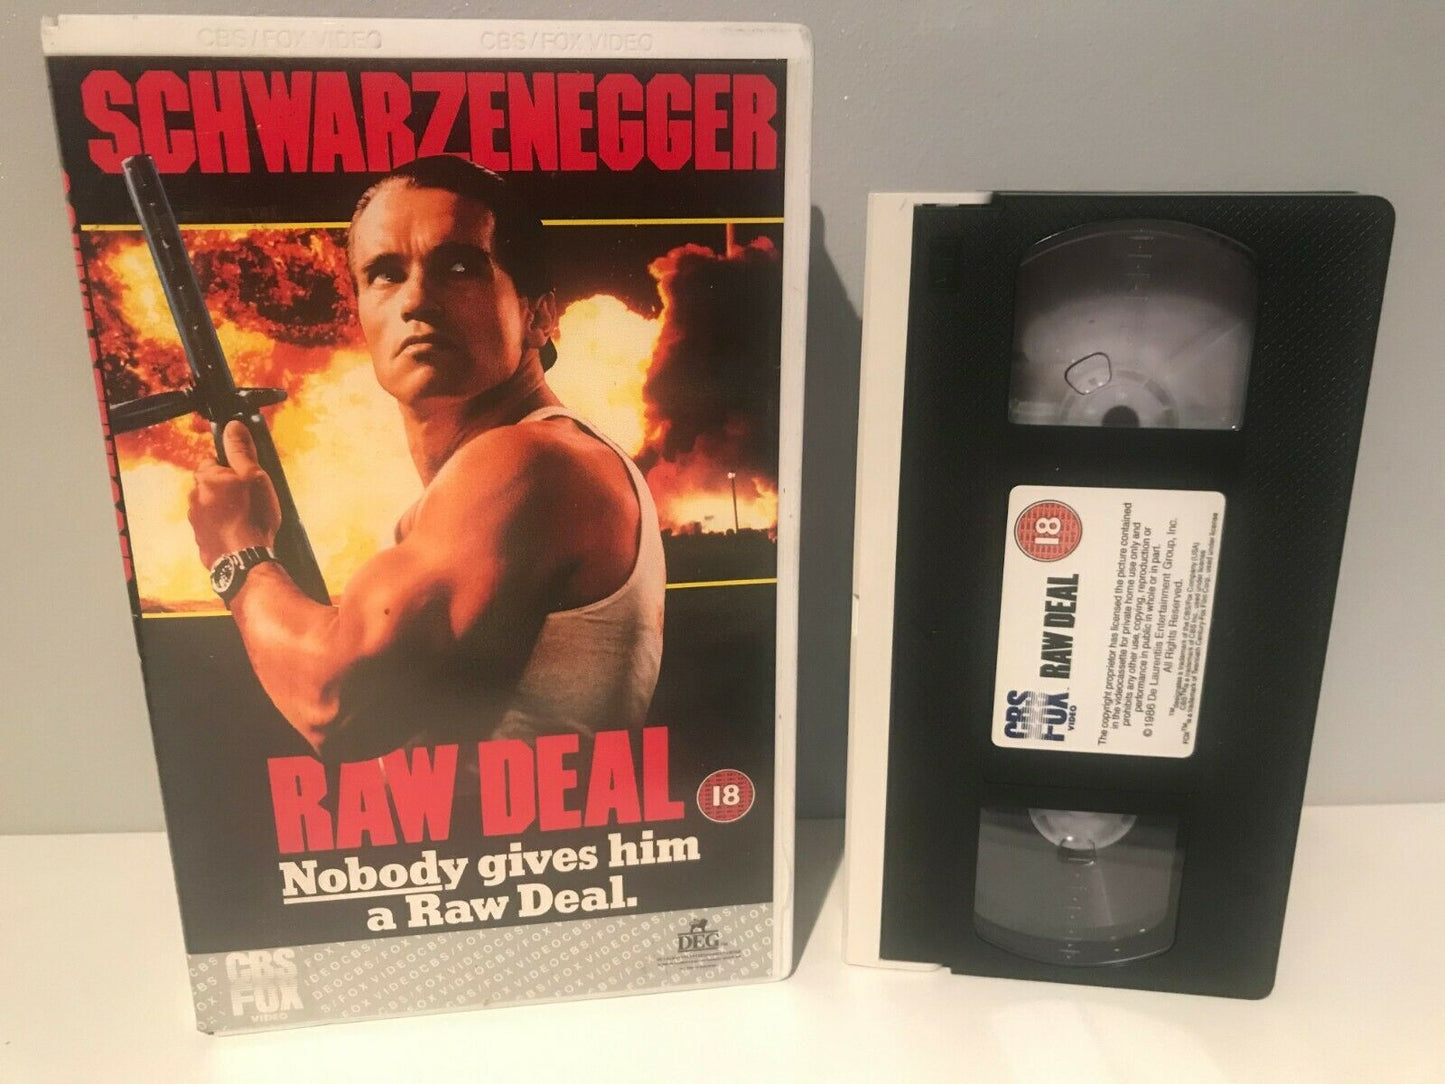 Raw Deal: (1986) Hero-Bloodshed-Action - A.Schwarzenegger Classic. Big CBS VHS-